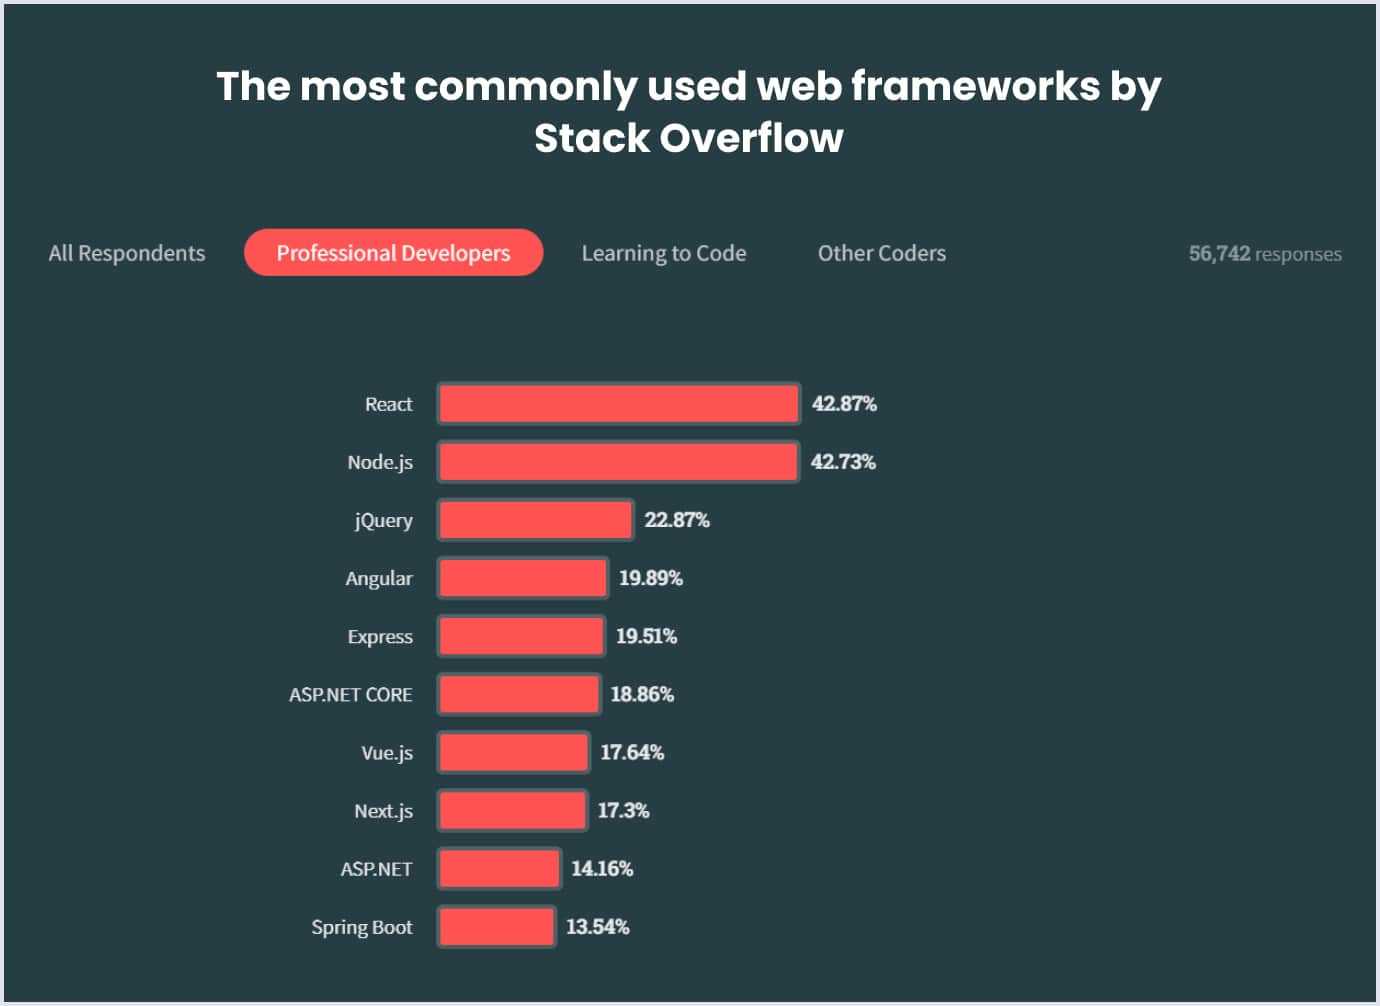 The most commonly used web frameworks